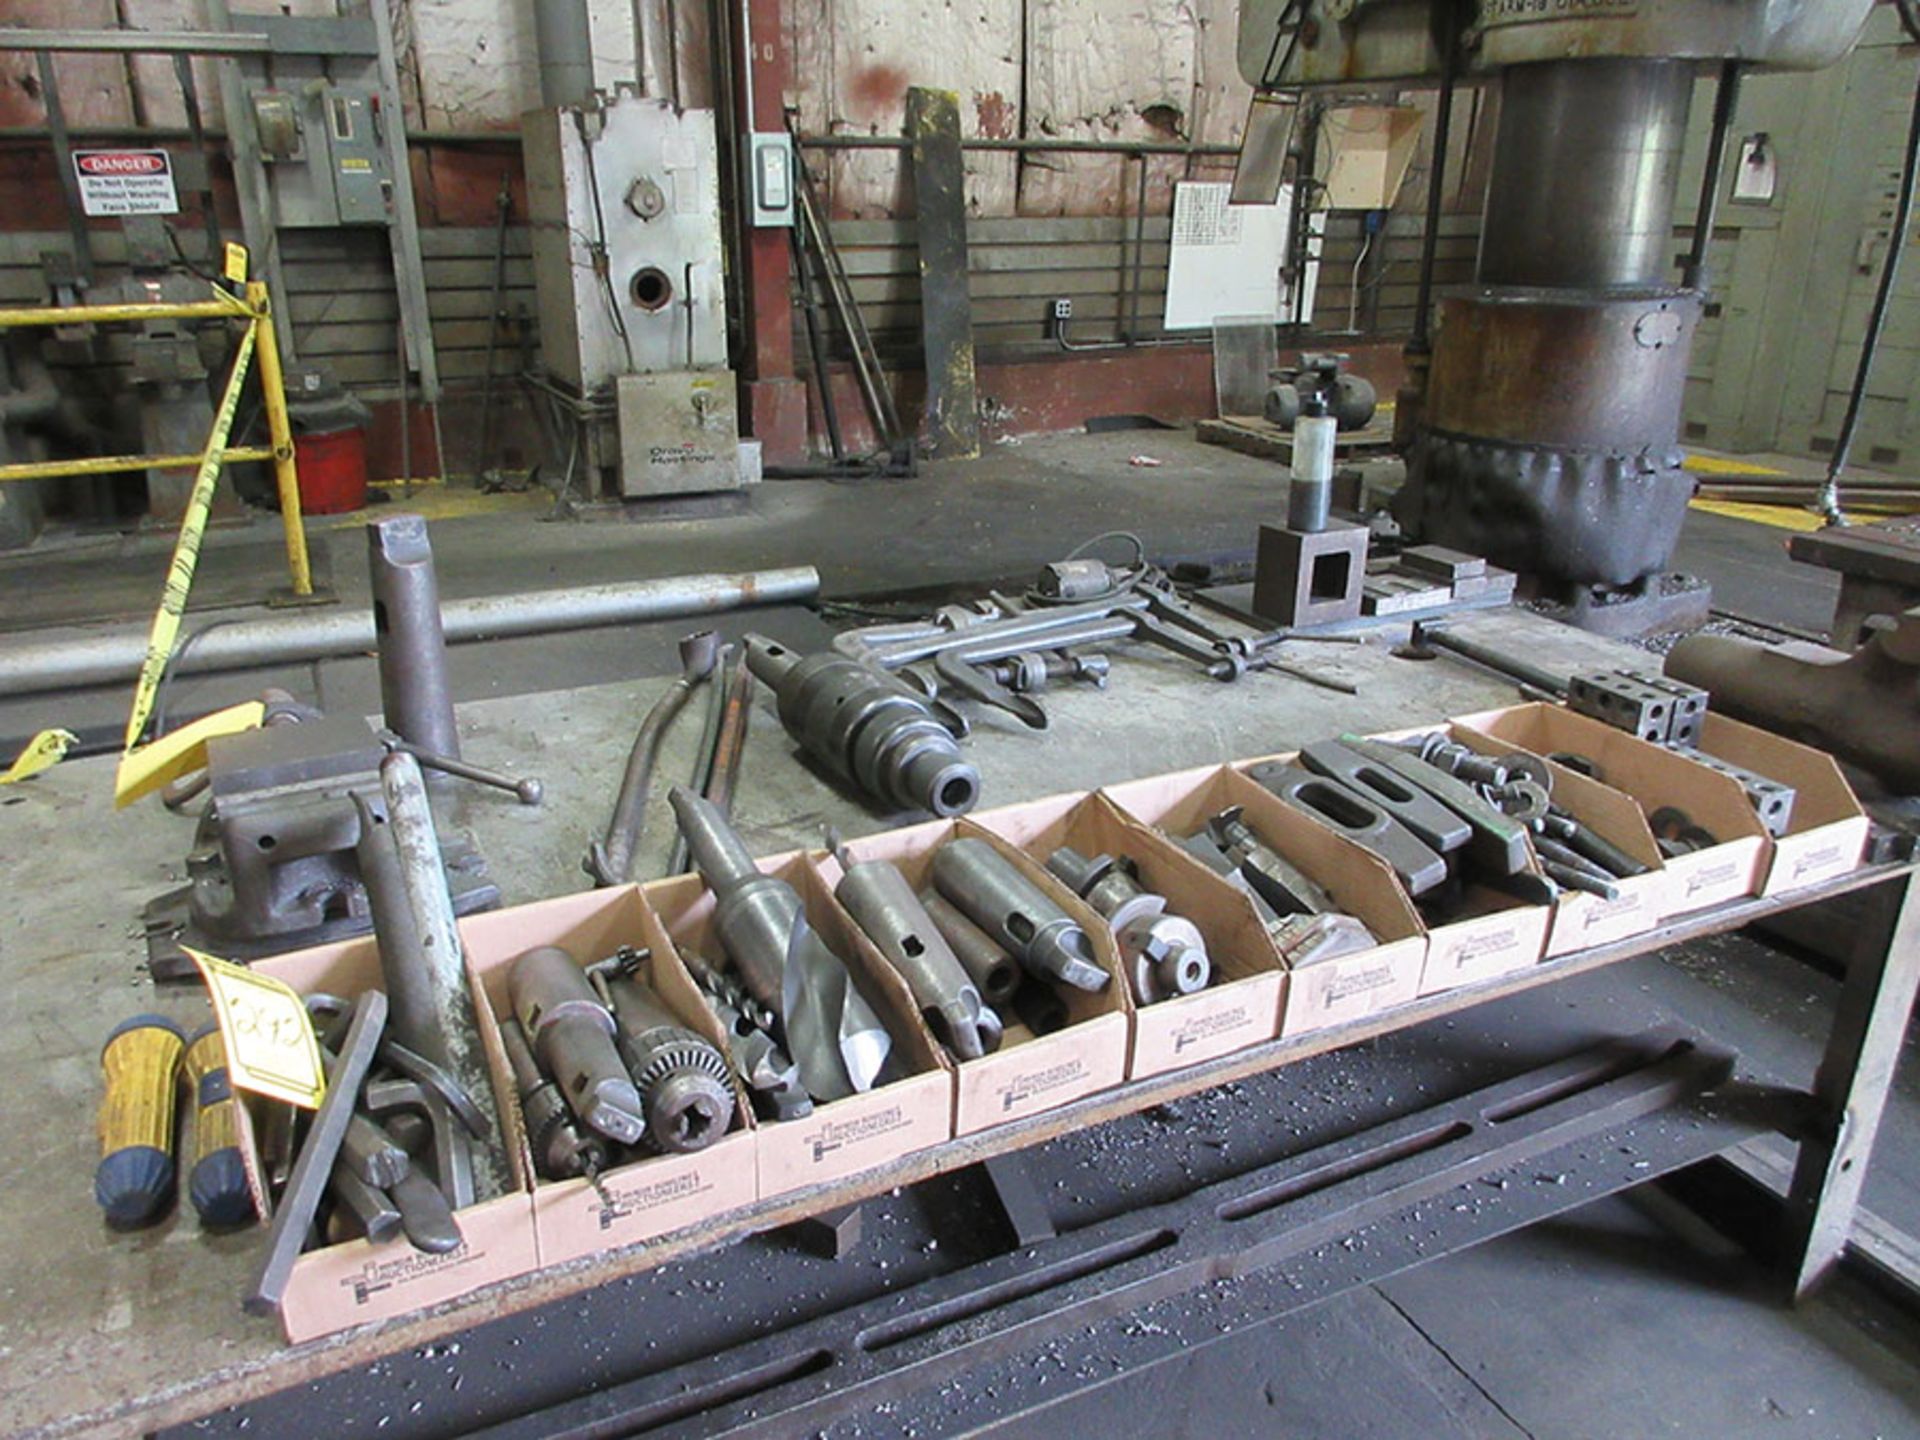 CONTENTS OF TABLE; BRIDGEPORT 6'' MACHINE VISE, TAPER TOOLS, HOLD DOWNS, AND DRILL BITS